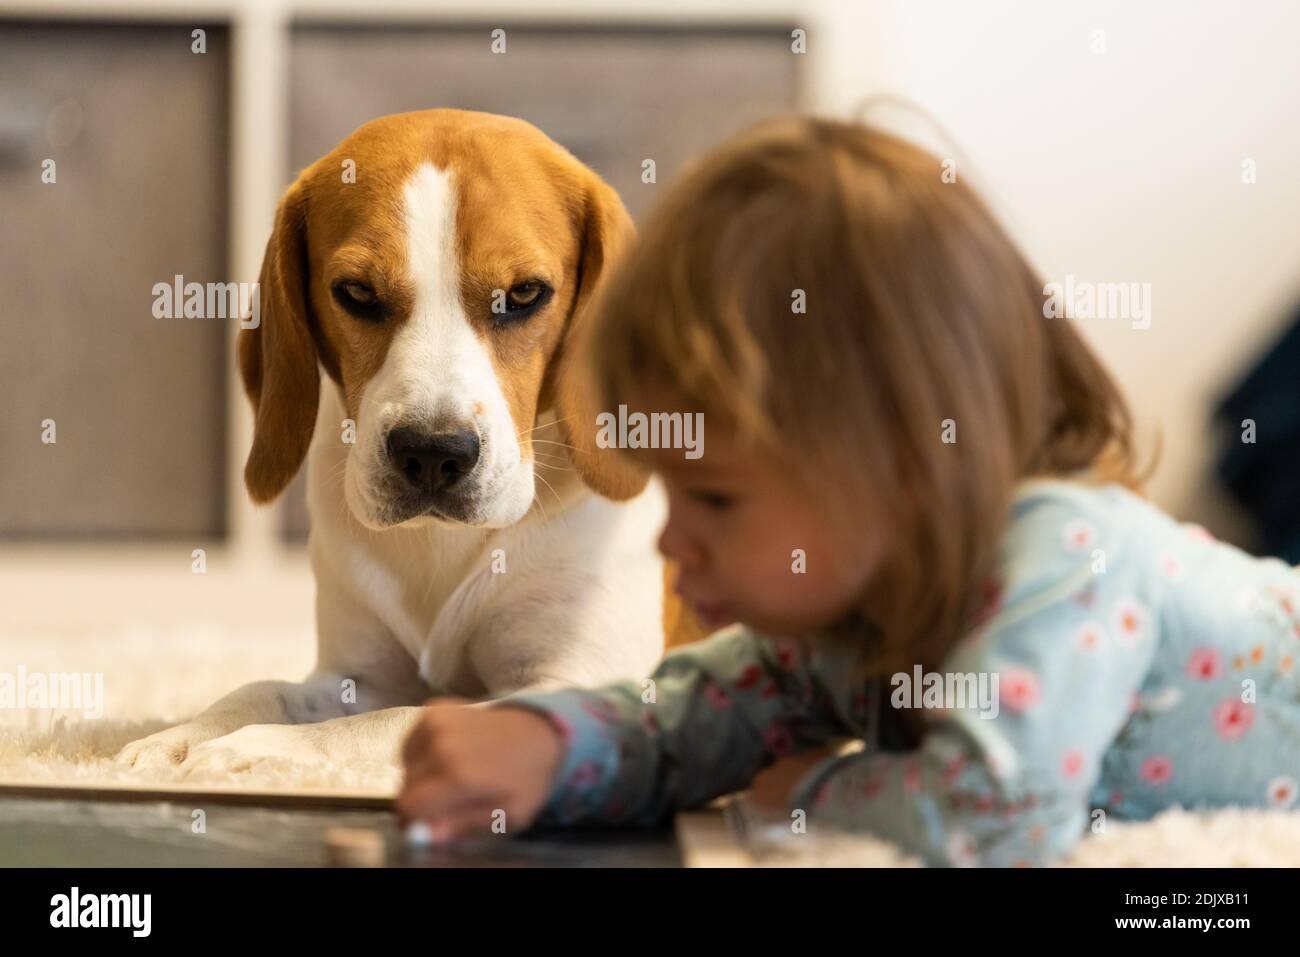 Cute Girl With Dog Relaxing On Floor At Home Stock Photo